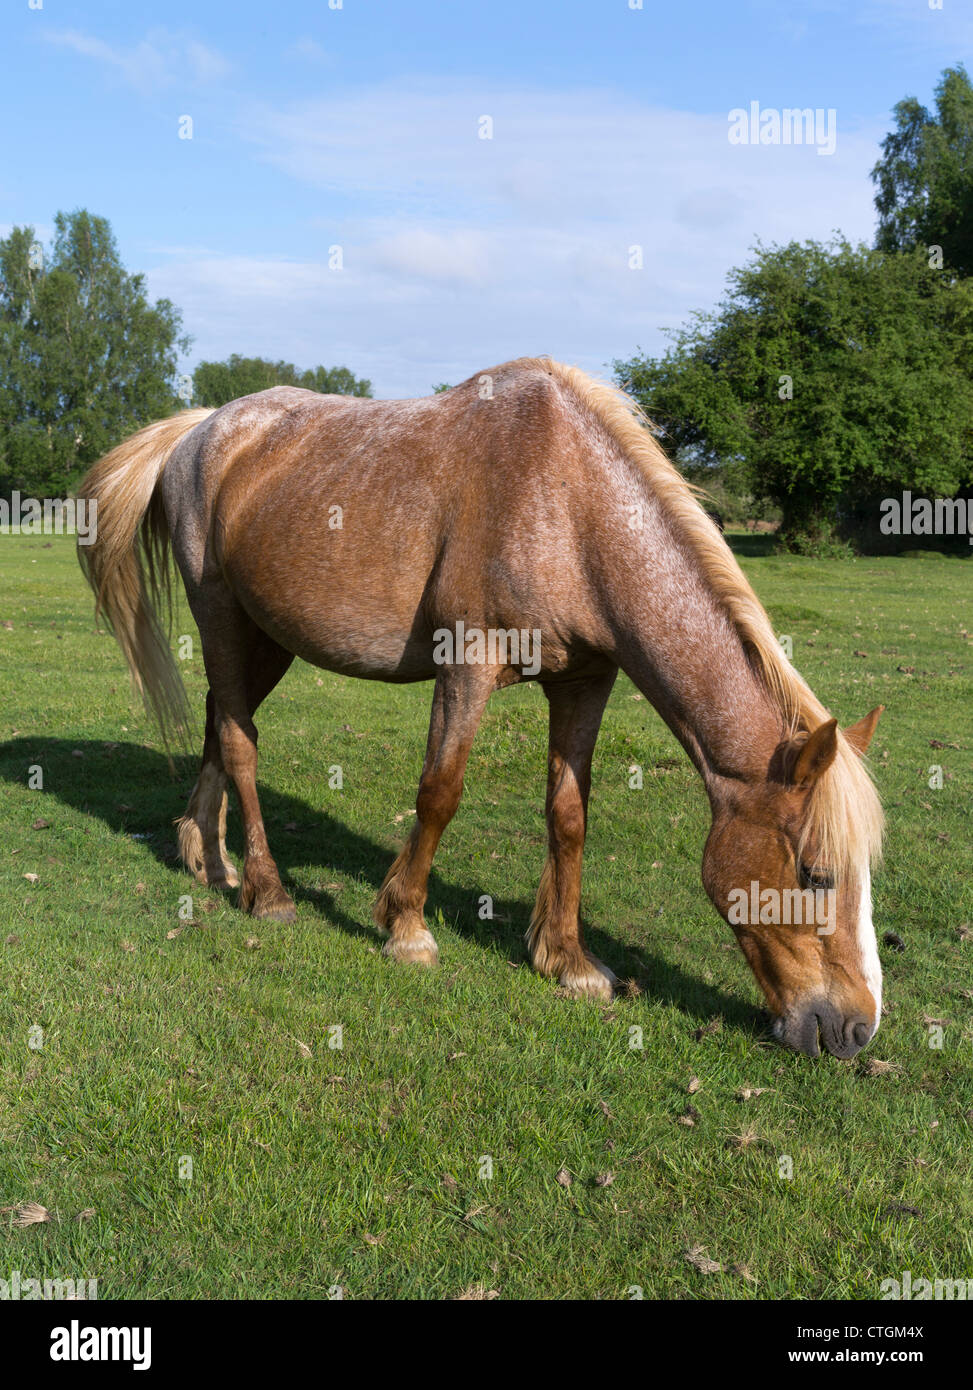 dh  NEW FOREST HAMPSHIRE New Forest pony a horse grazing on common land in field uk Stock Photo